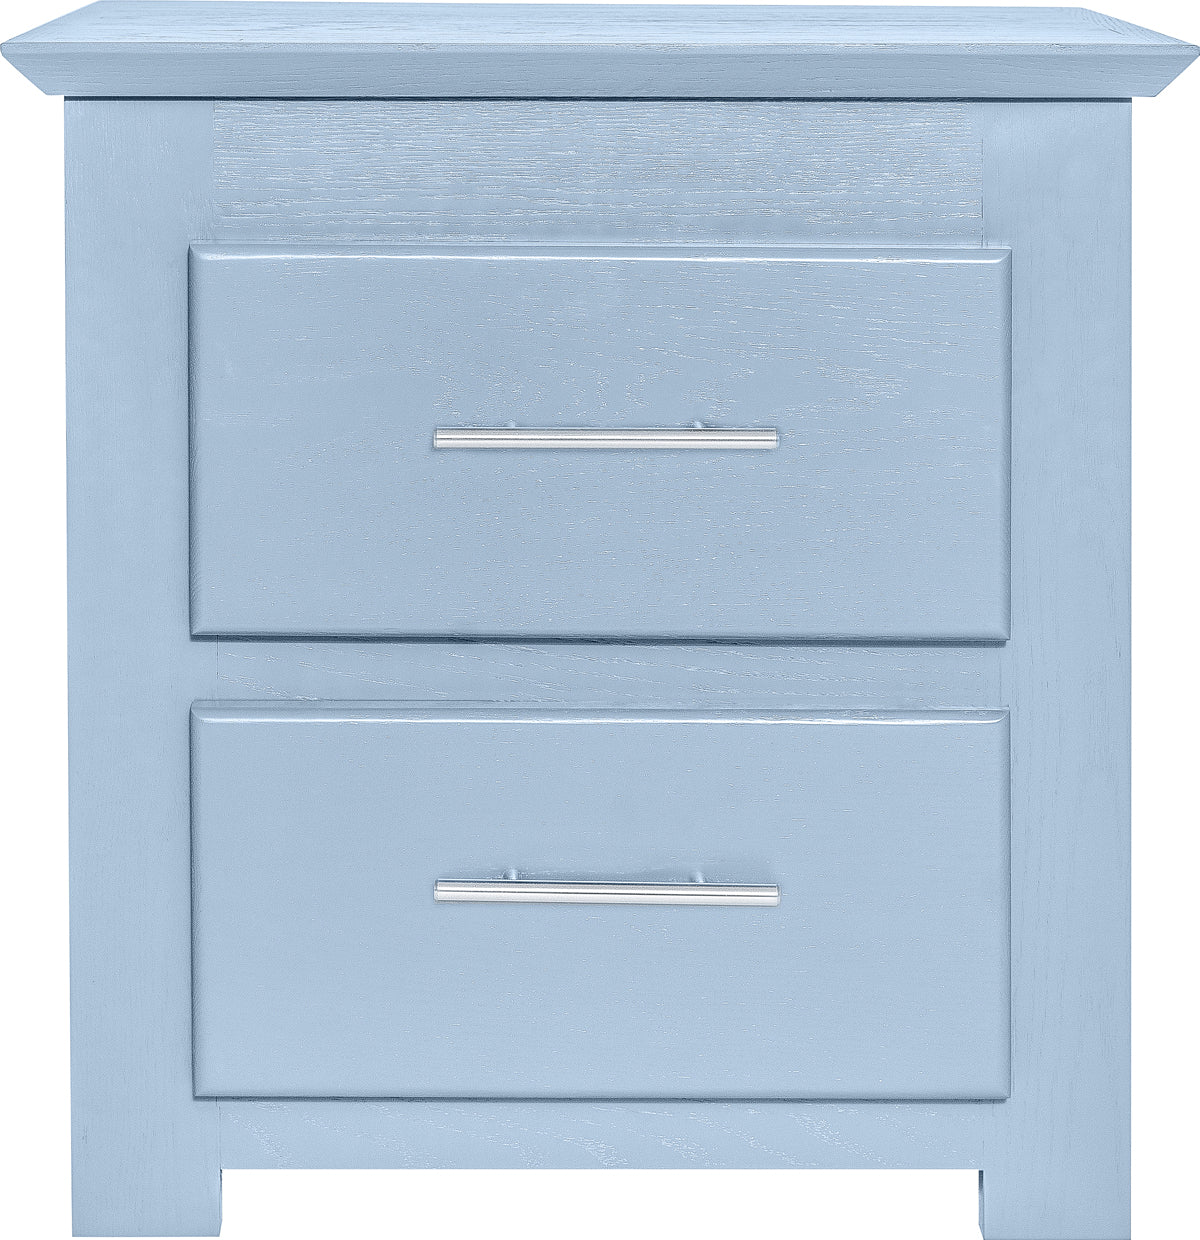 THE PATRIOT: Nightstand (2 drawers)